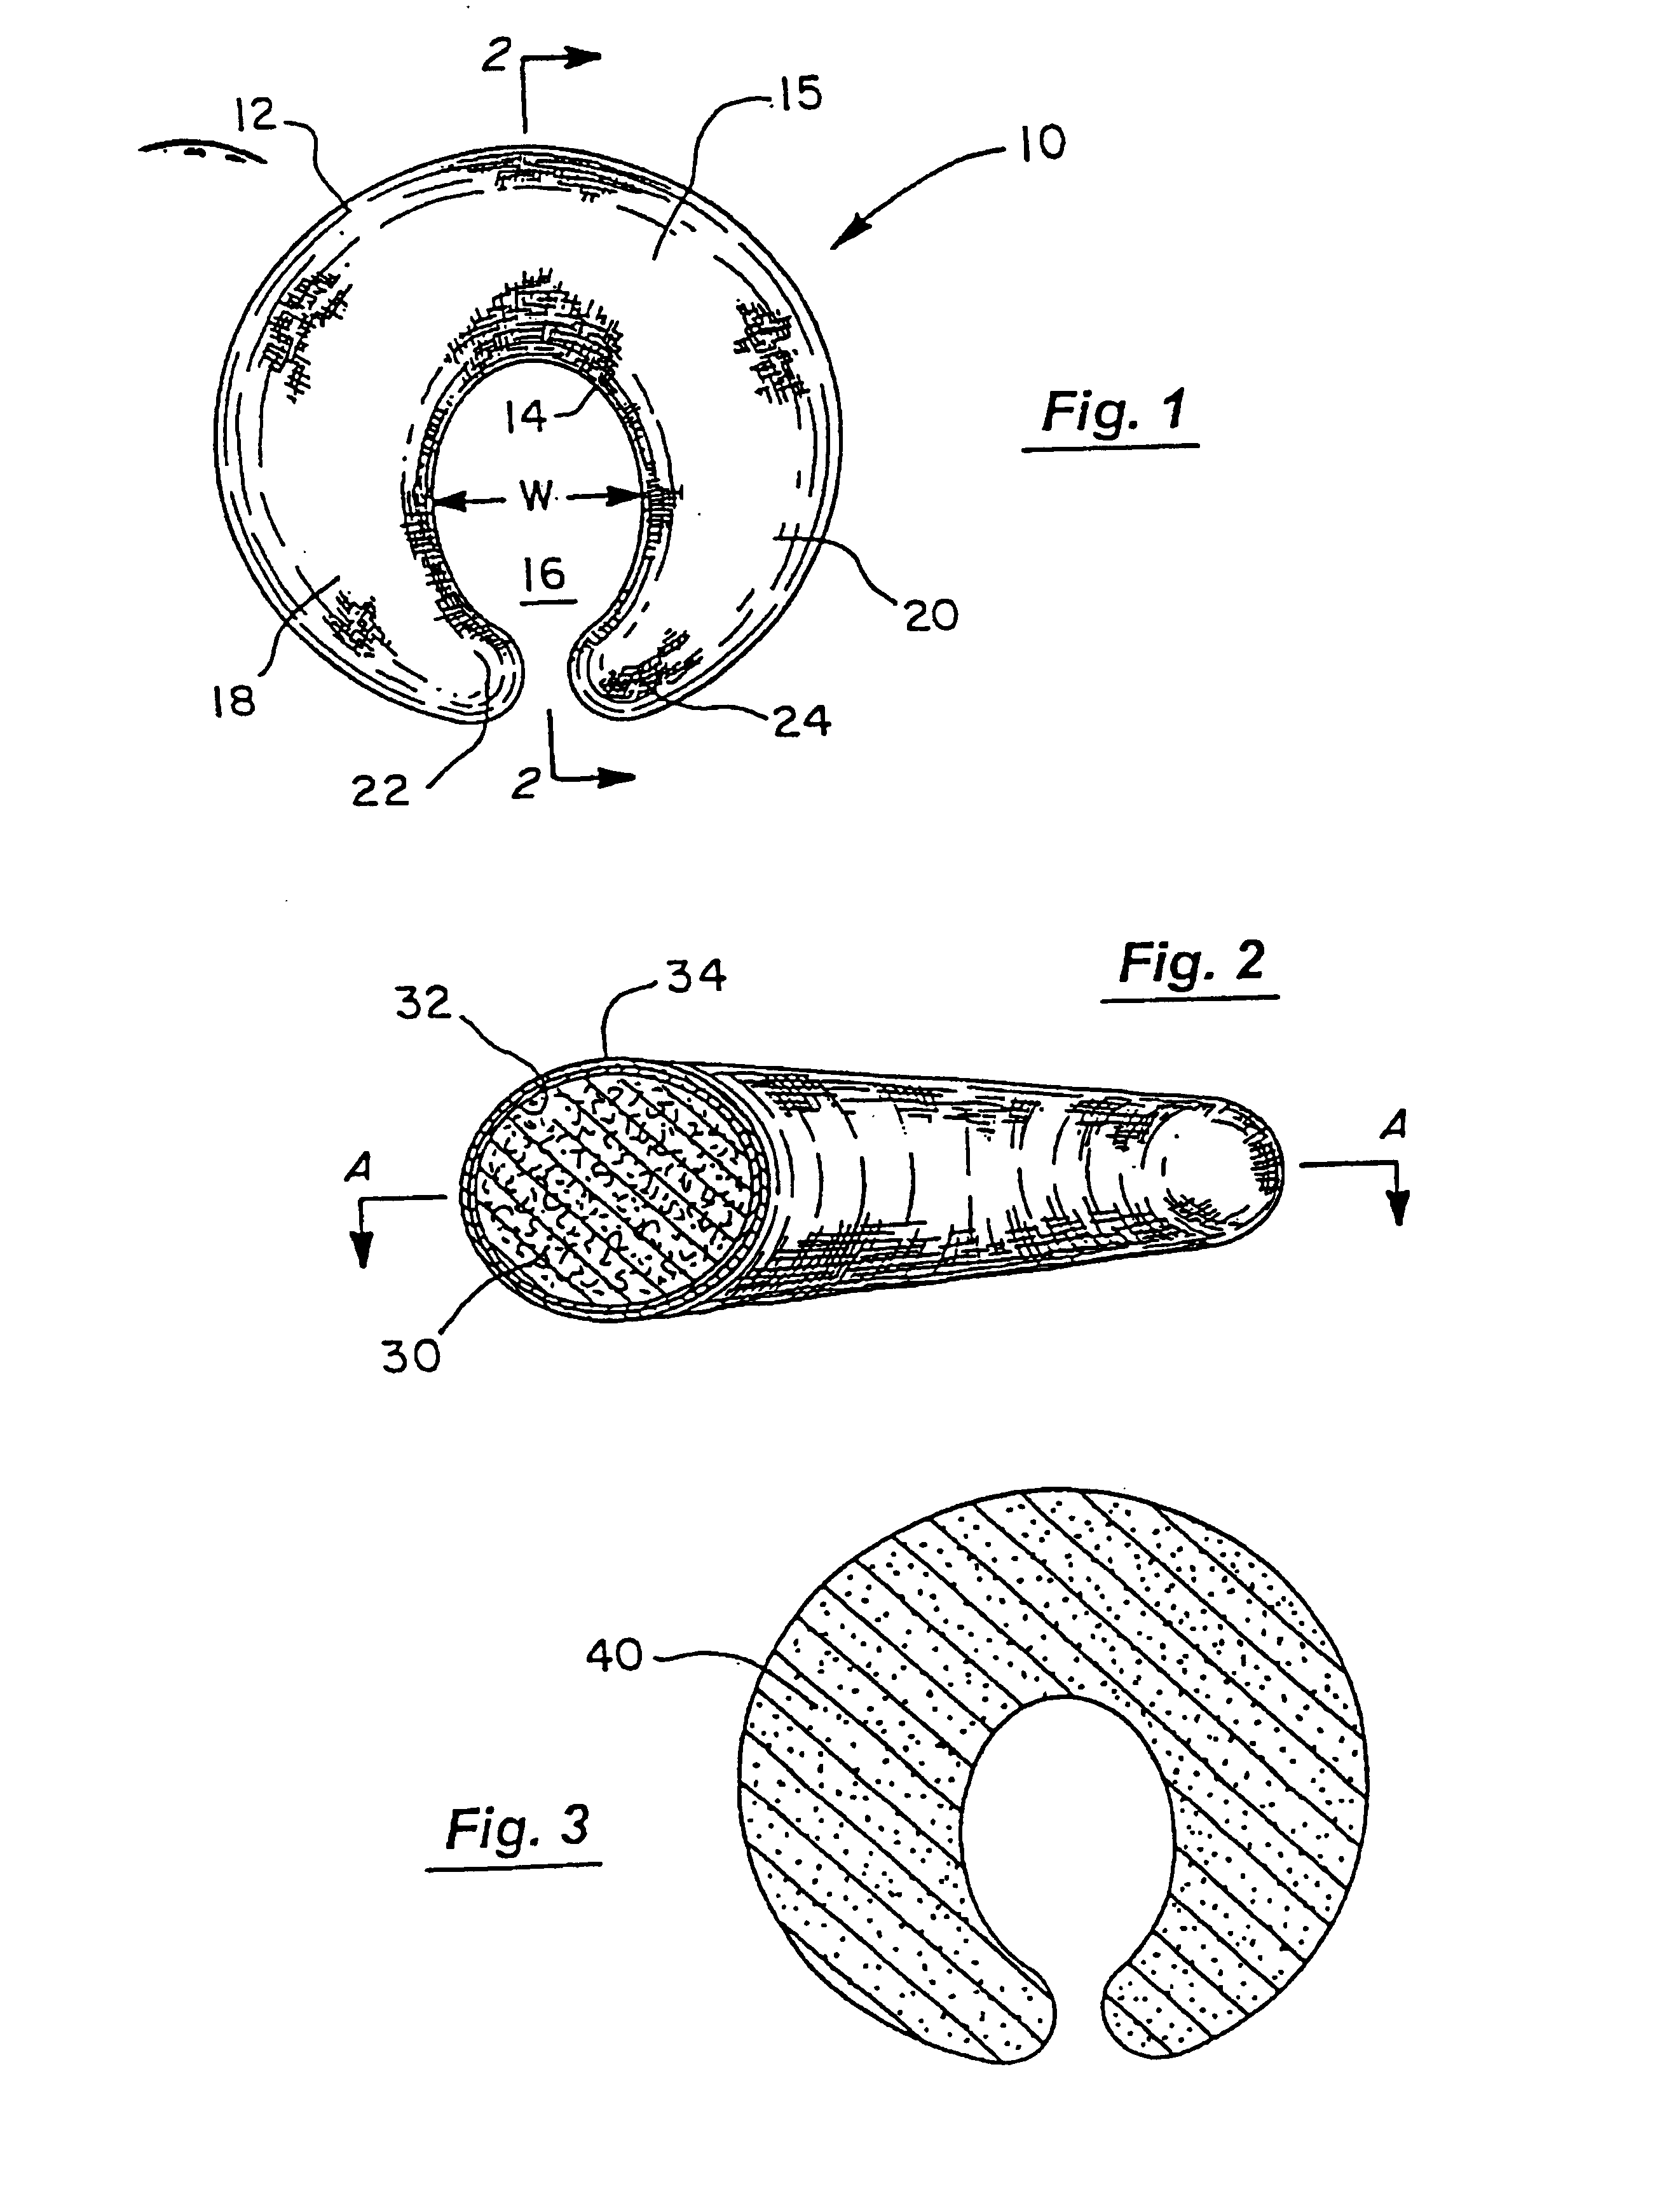 Support pillow with flaps and methods